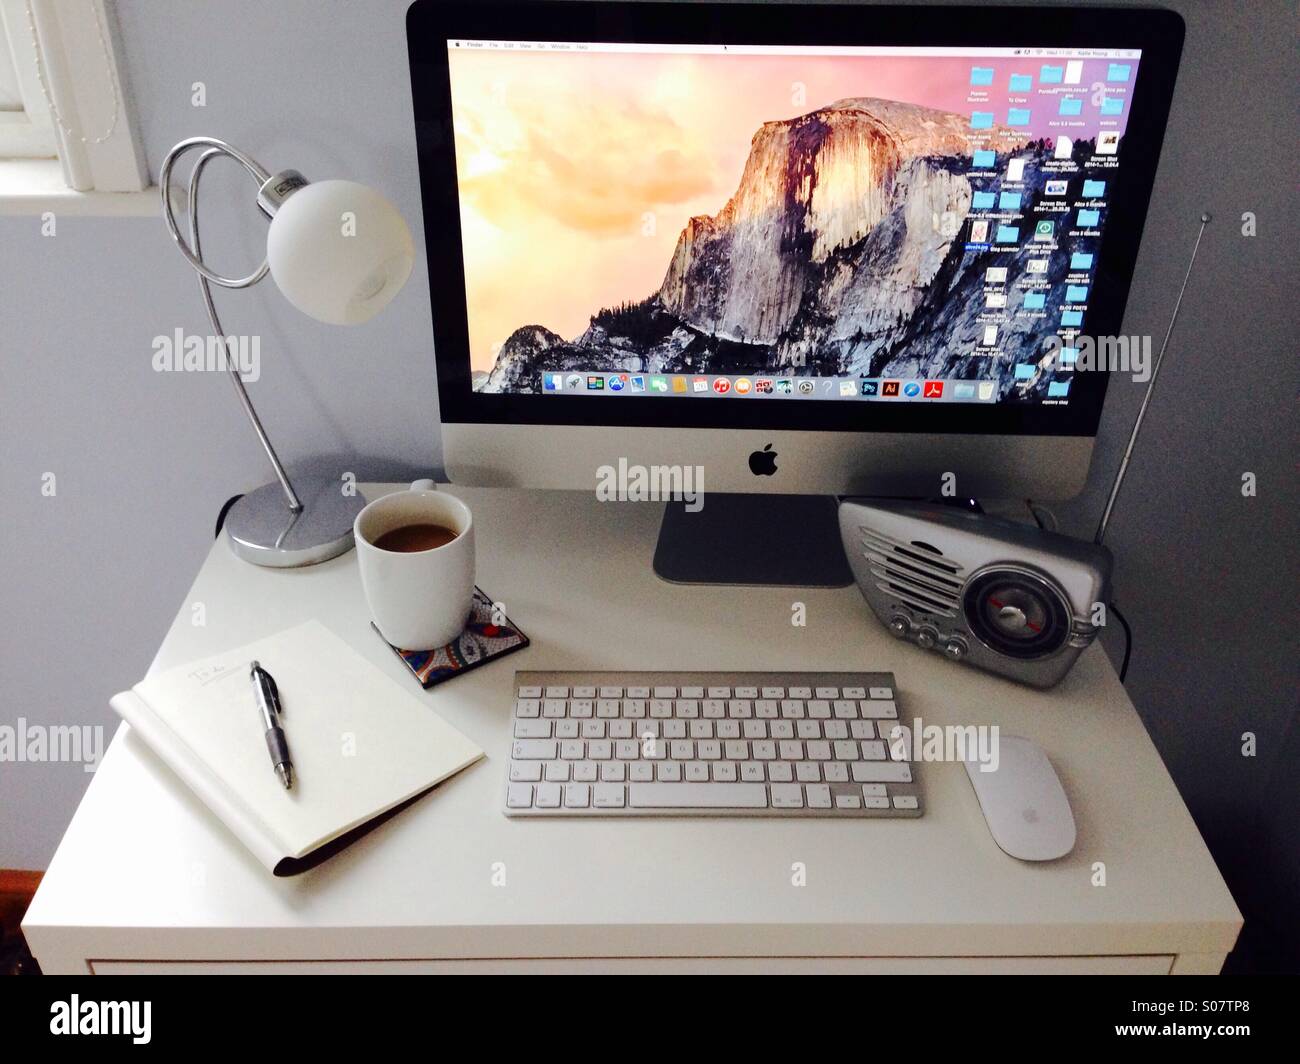 A home office with Mac desktop computer running the Yosemite operating system. Stock Photo